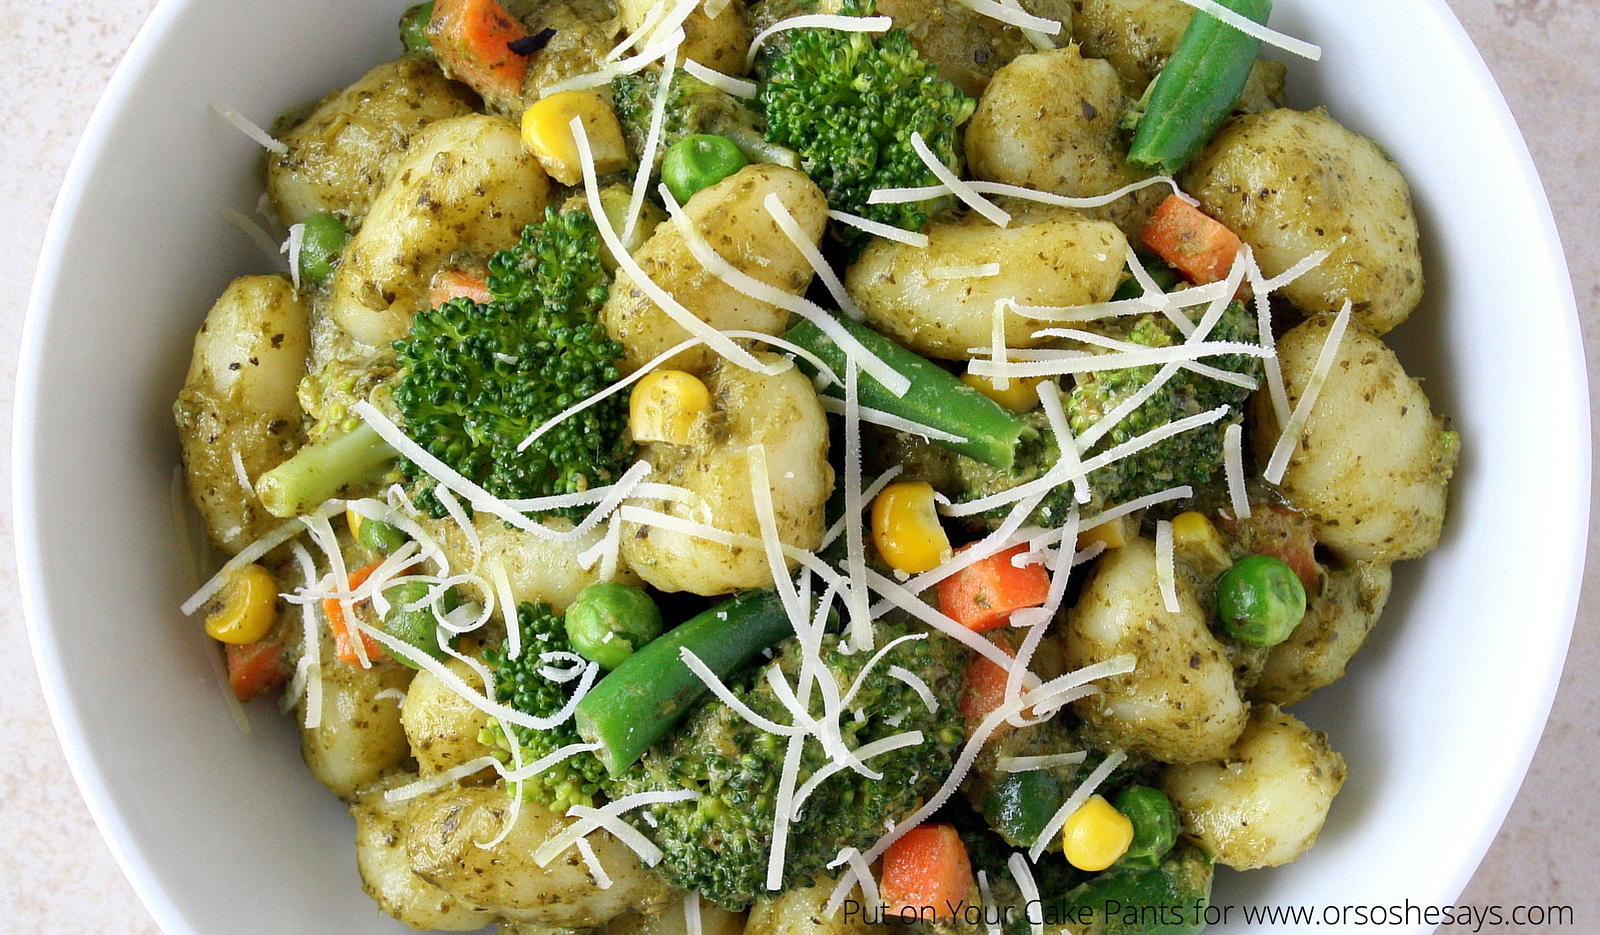 Creamy Pesto Gnocchi recipe - filled with fresh vegetables and loads of flavor!